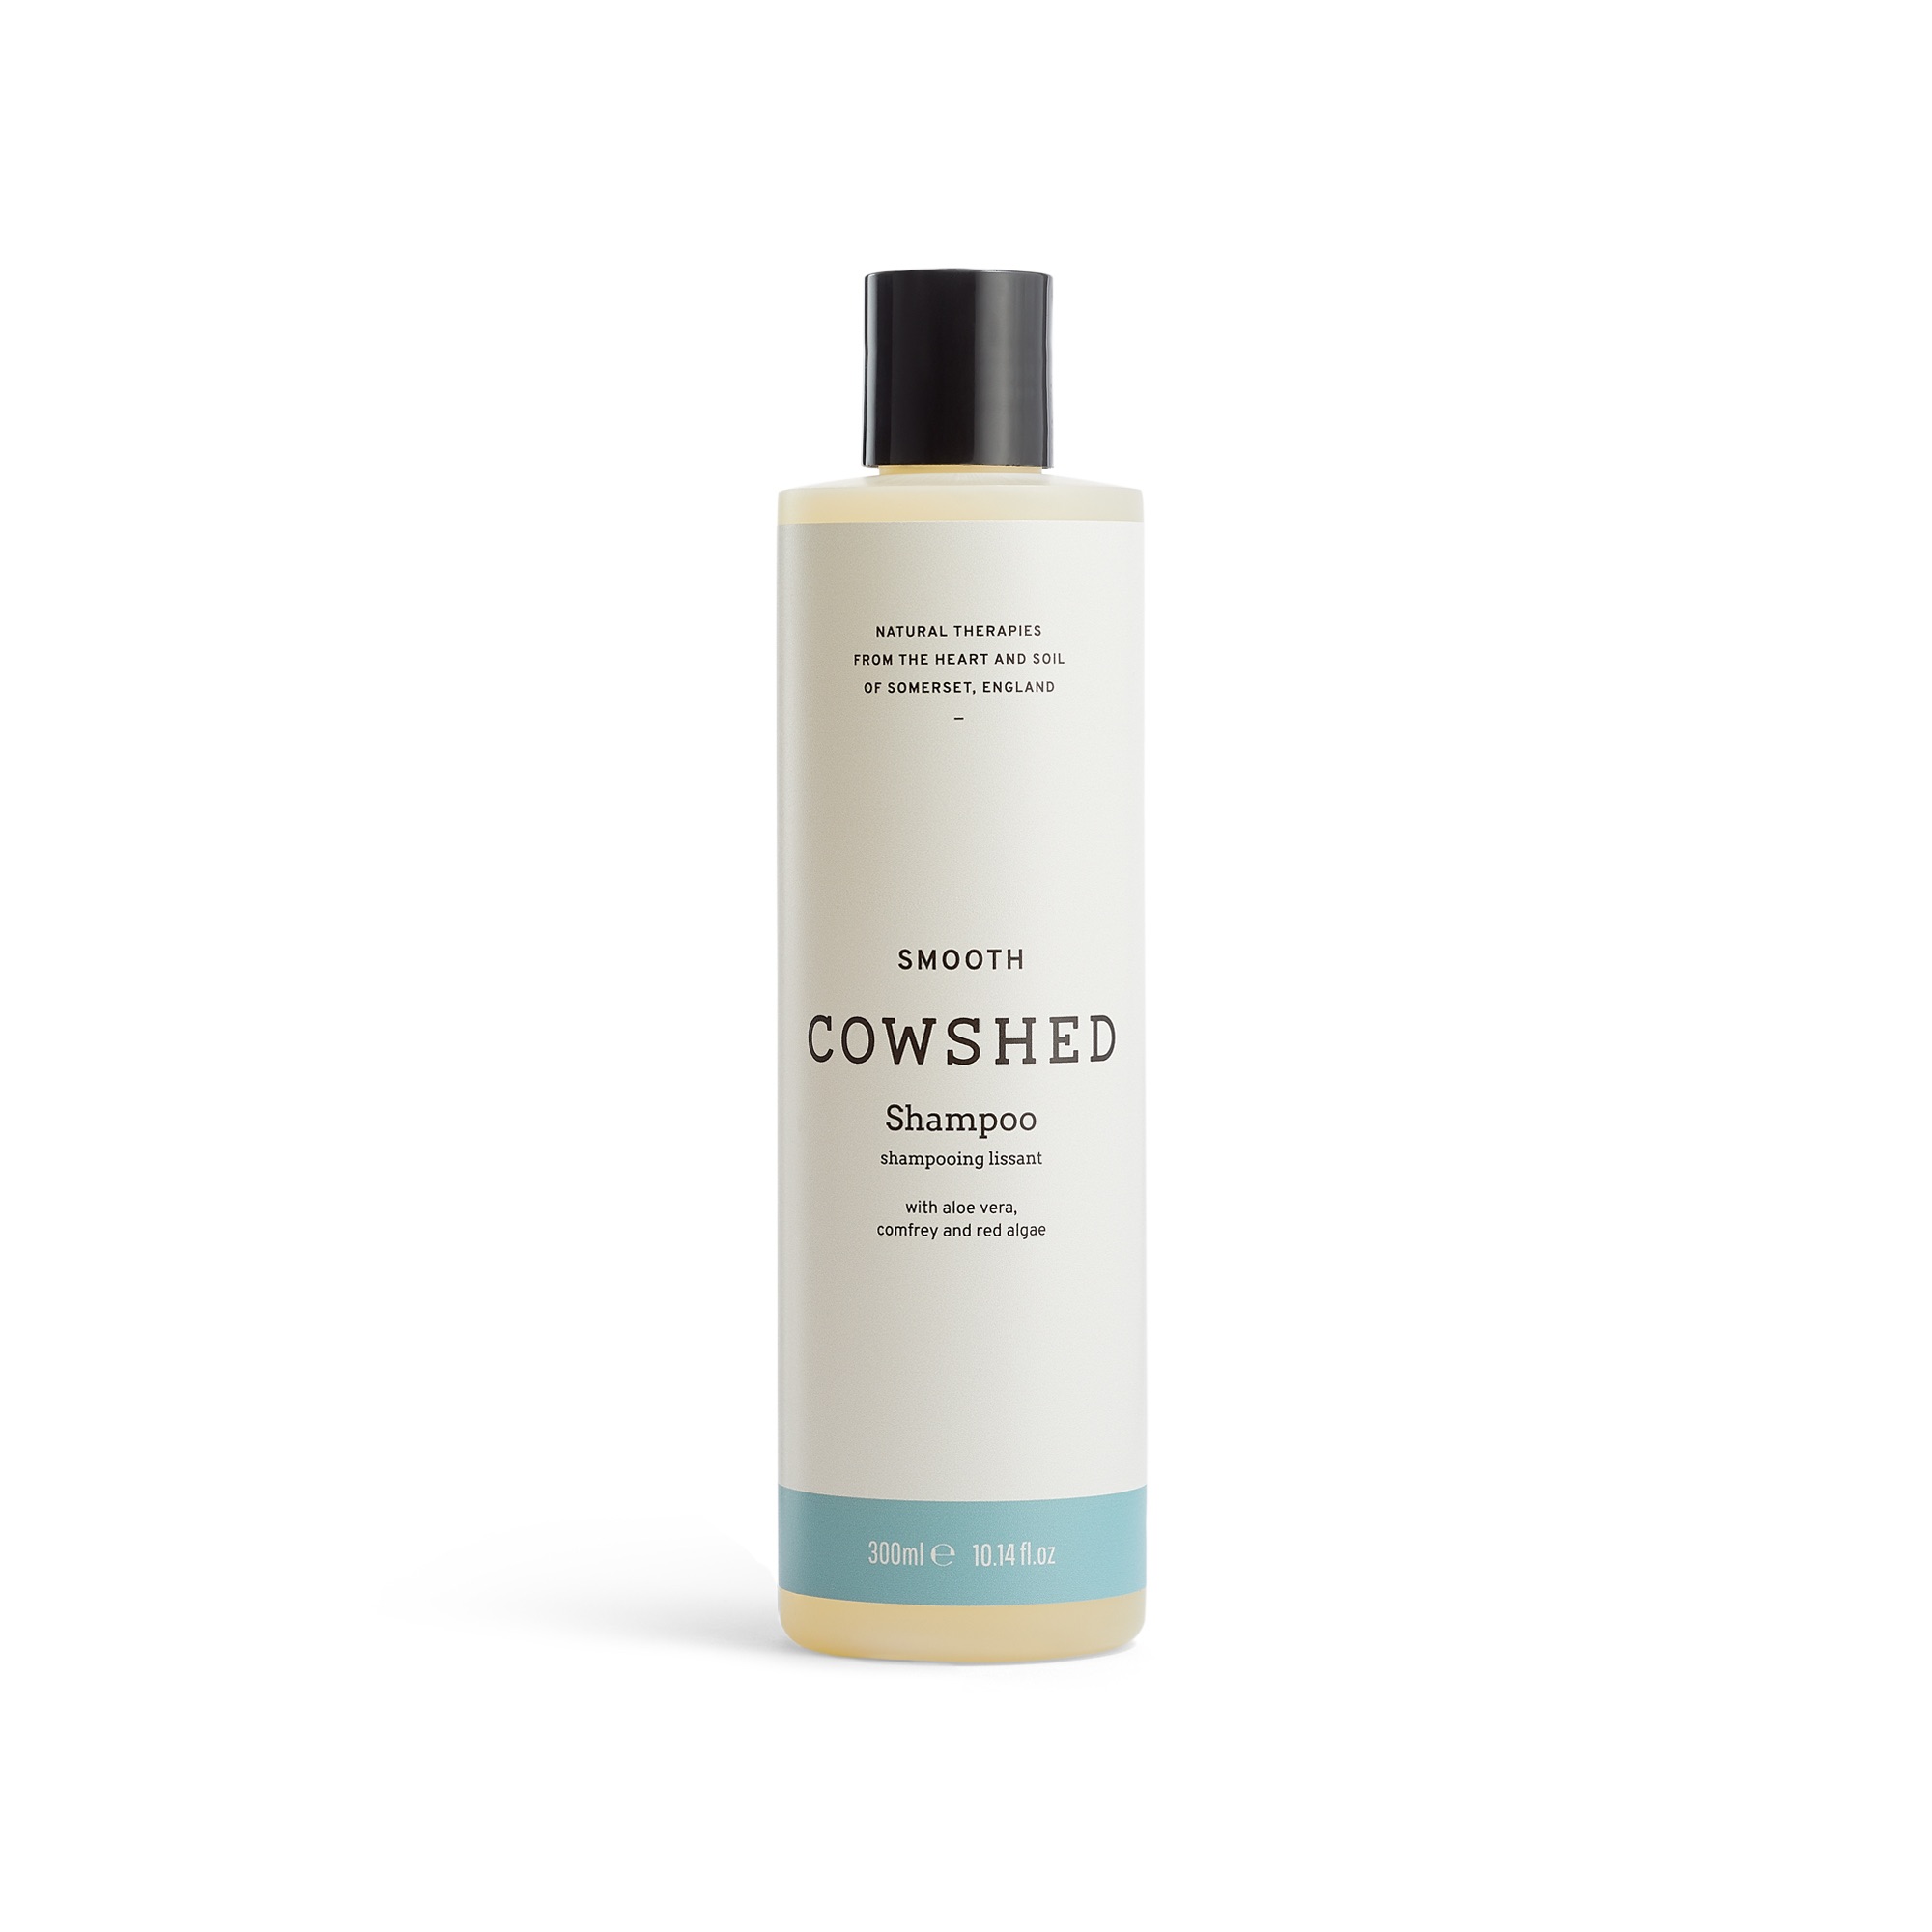 Cowshed SMOOTH Shampoo (Knackered Cow Smoothing Shampoo) 300ml